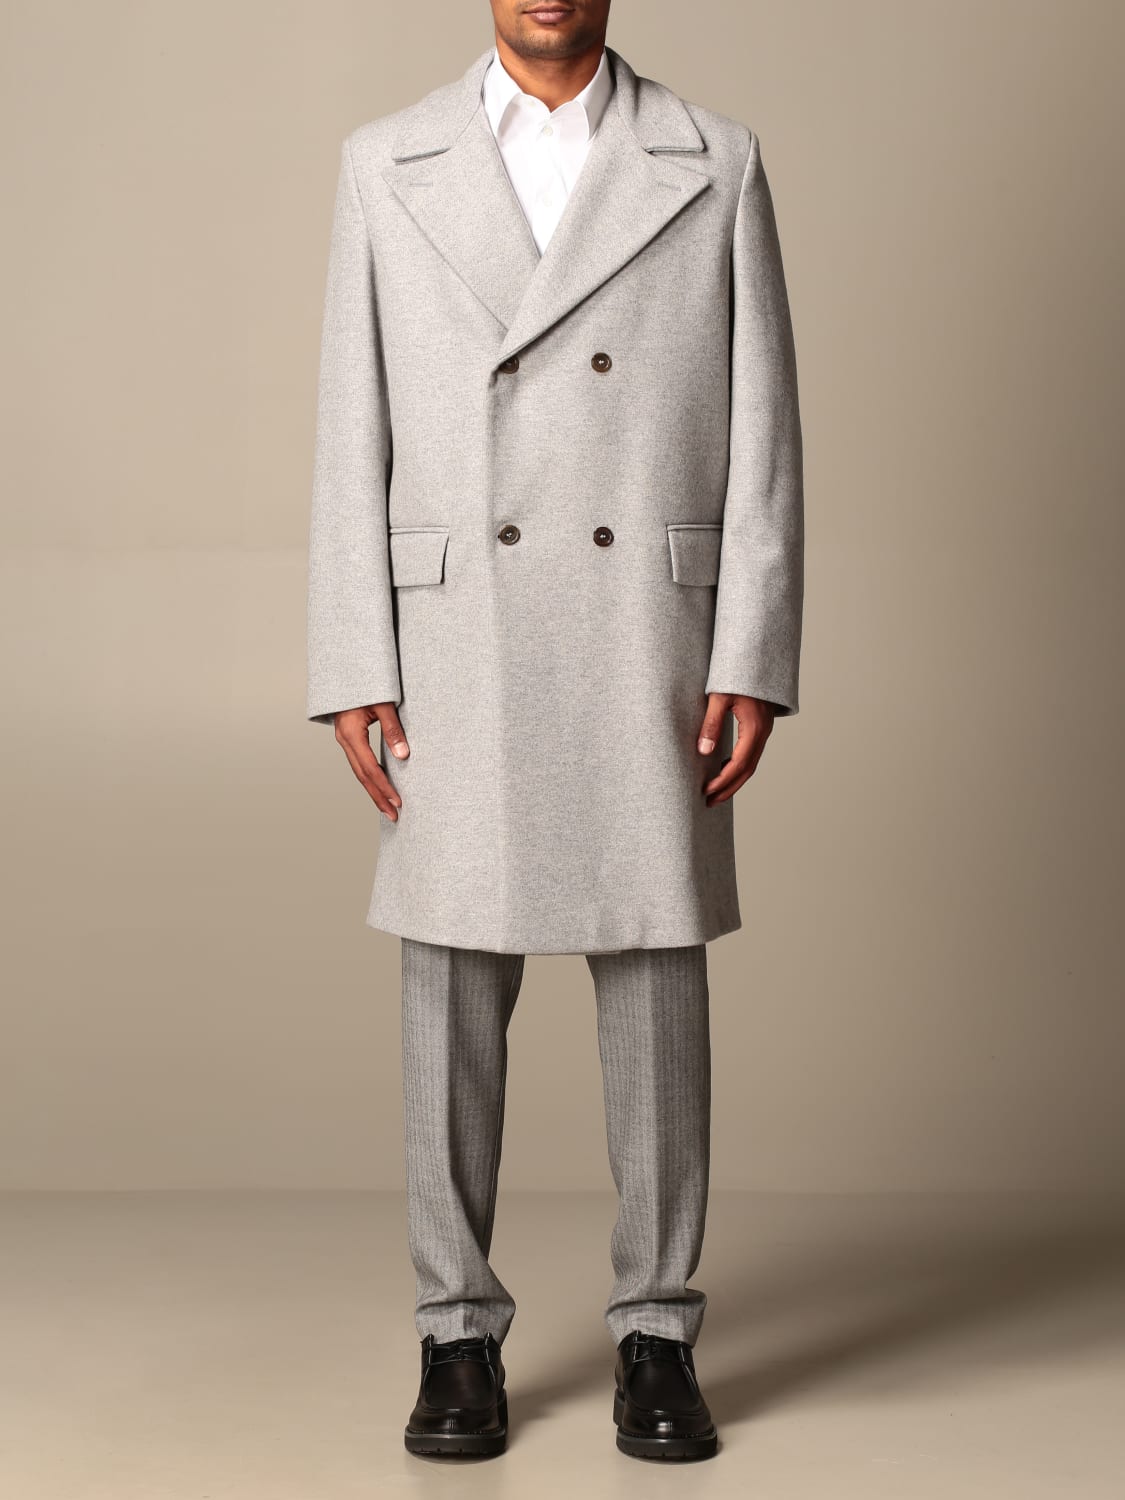 Mauro Grifoni double-breasted coat